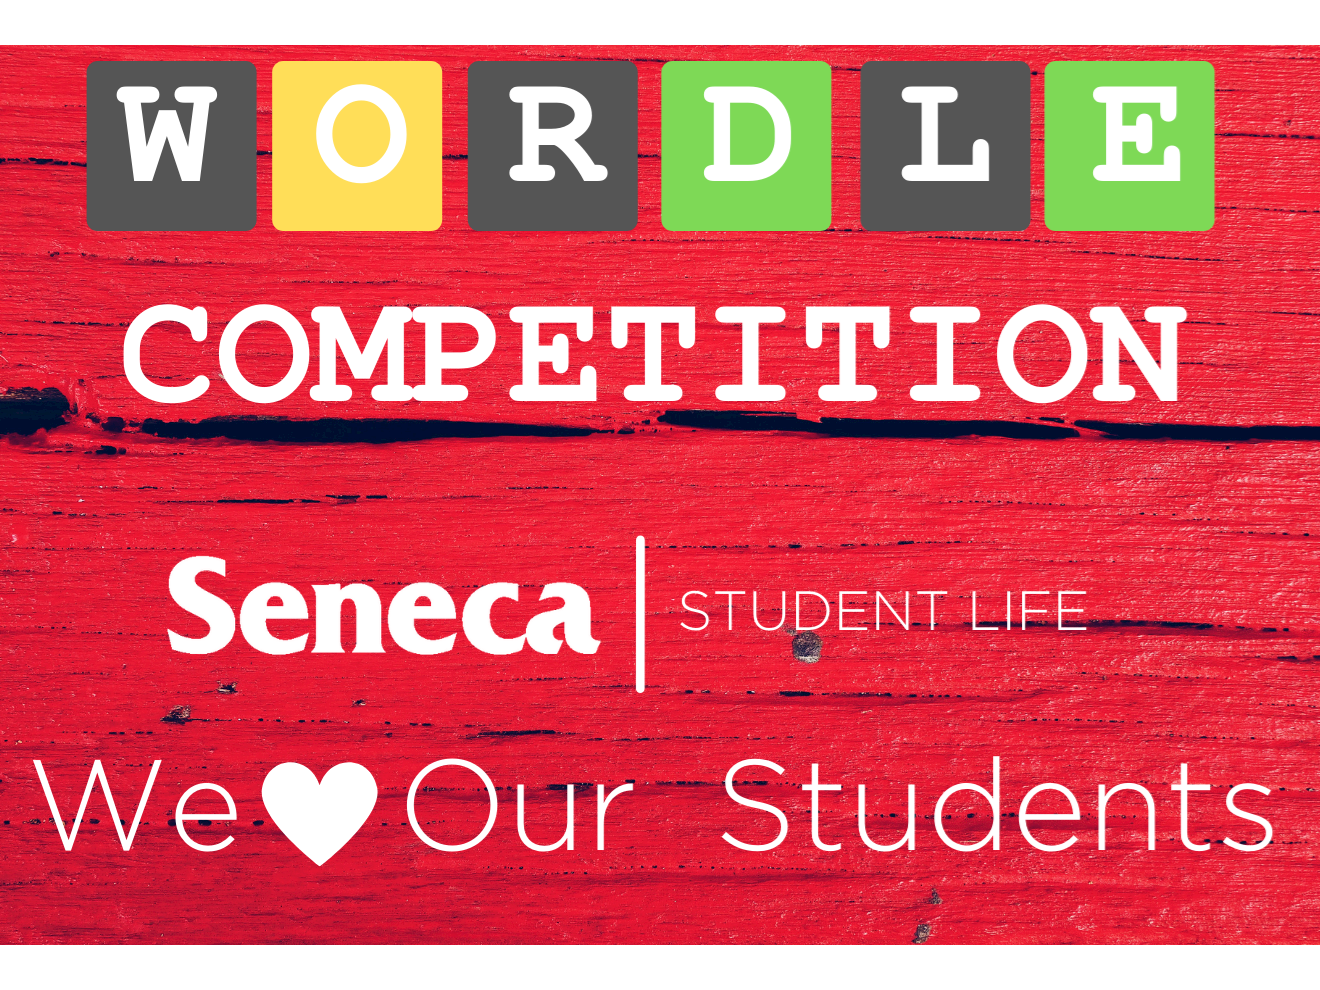 Join the Campaign for Students Wordle Competition